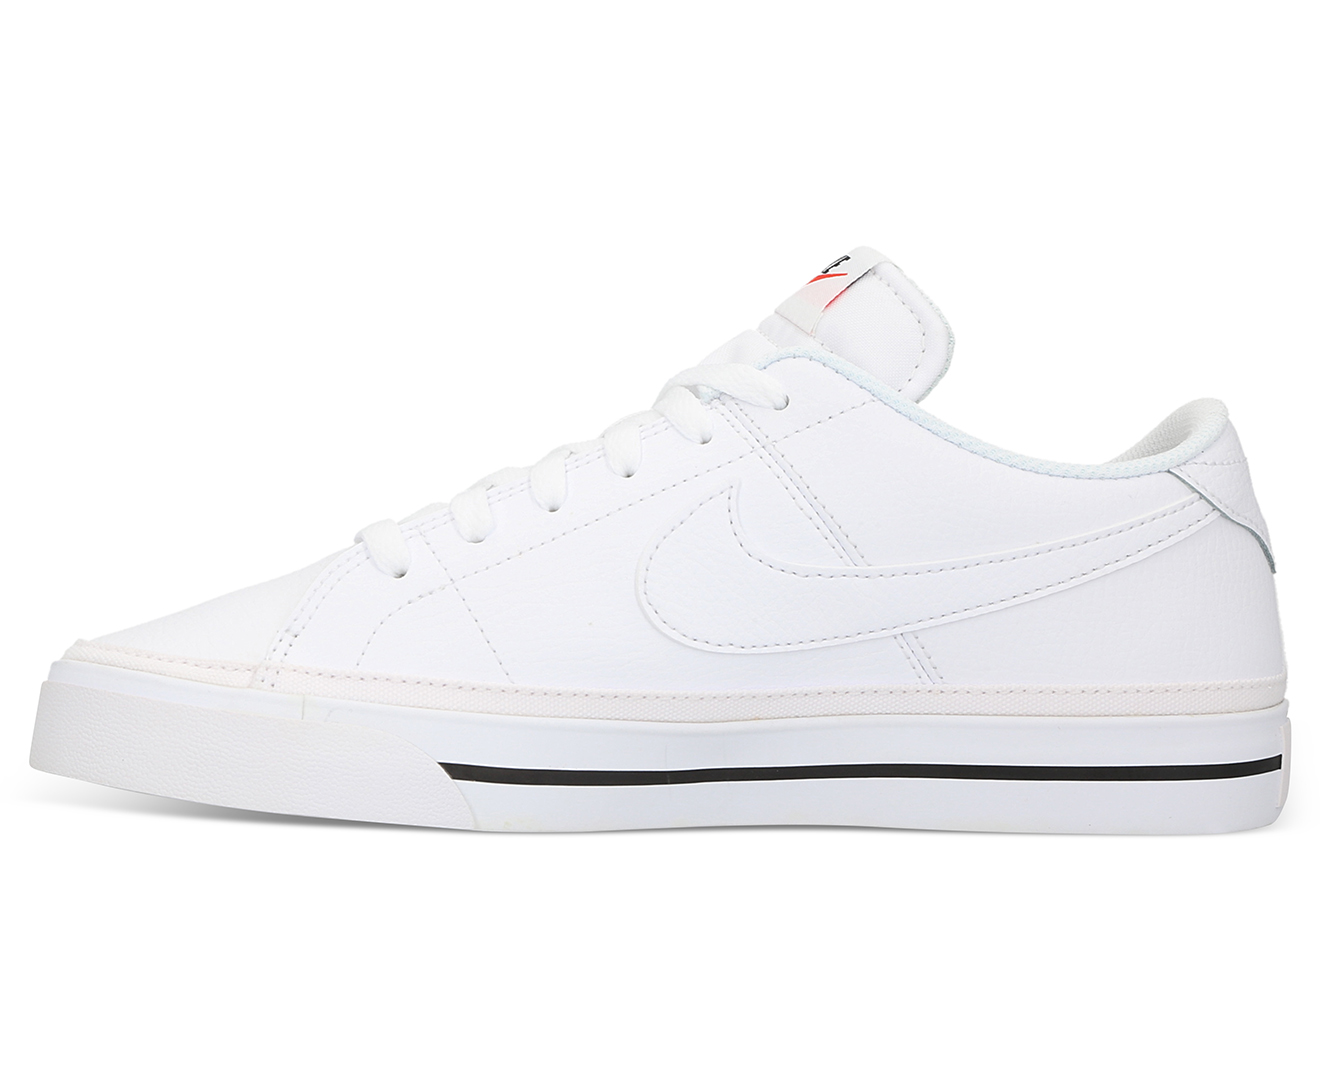 Nike Men's Court Legacy Leather Sneakers - White/Black | Catch.co.nz